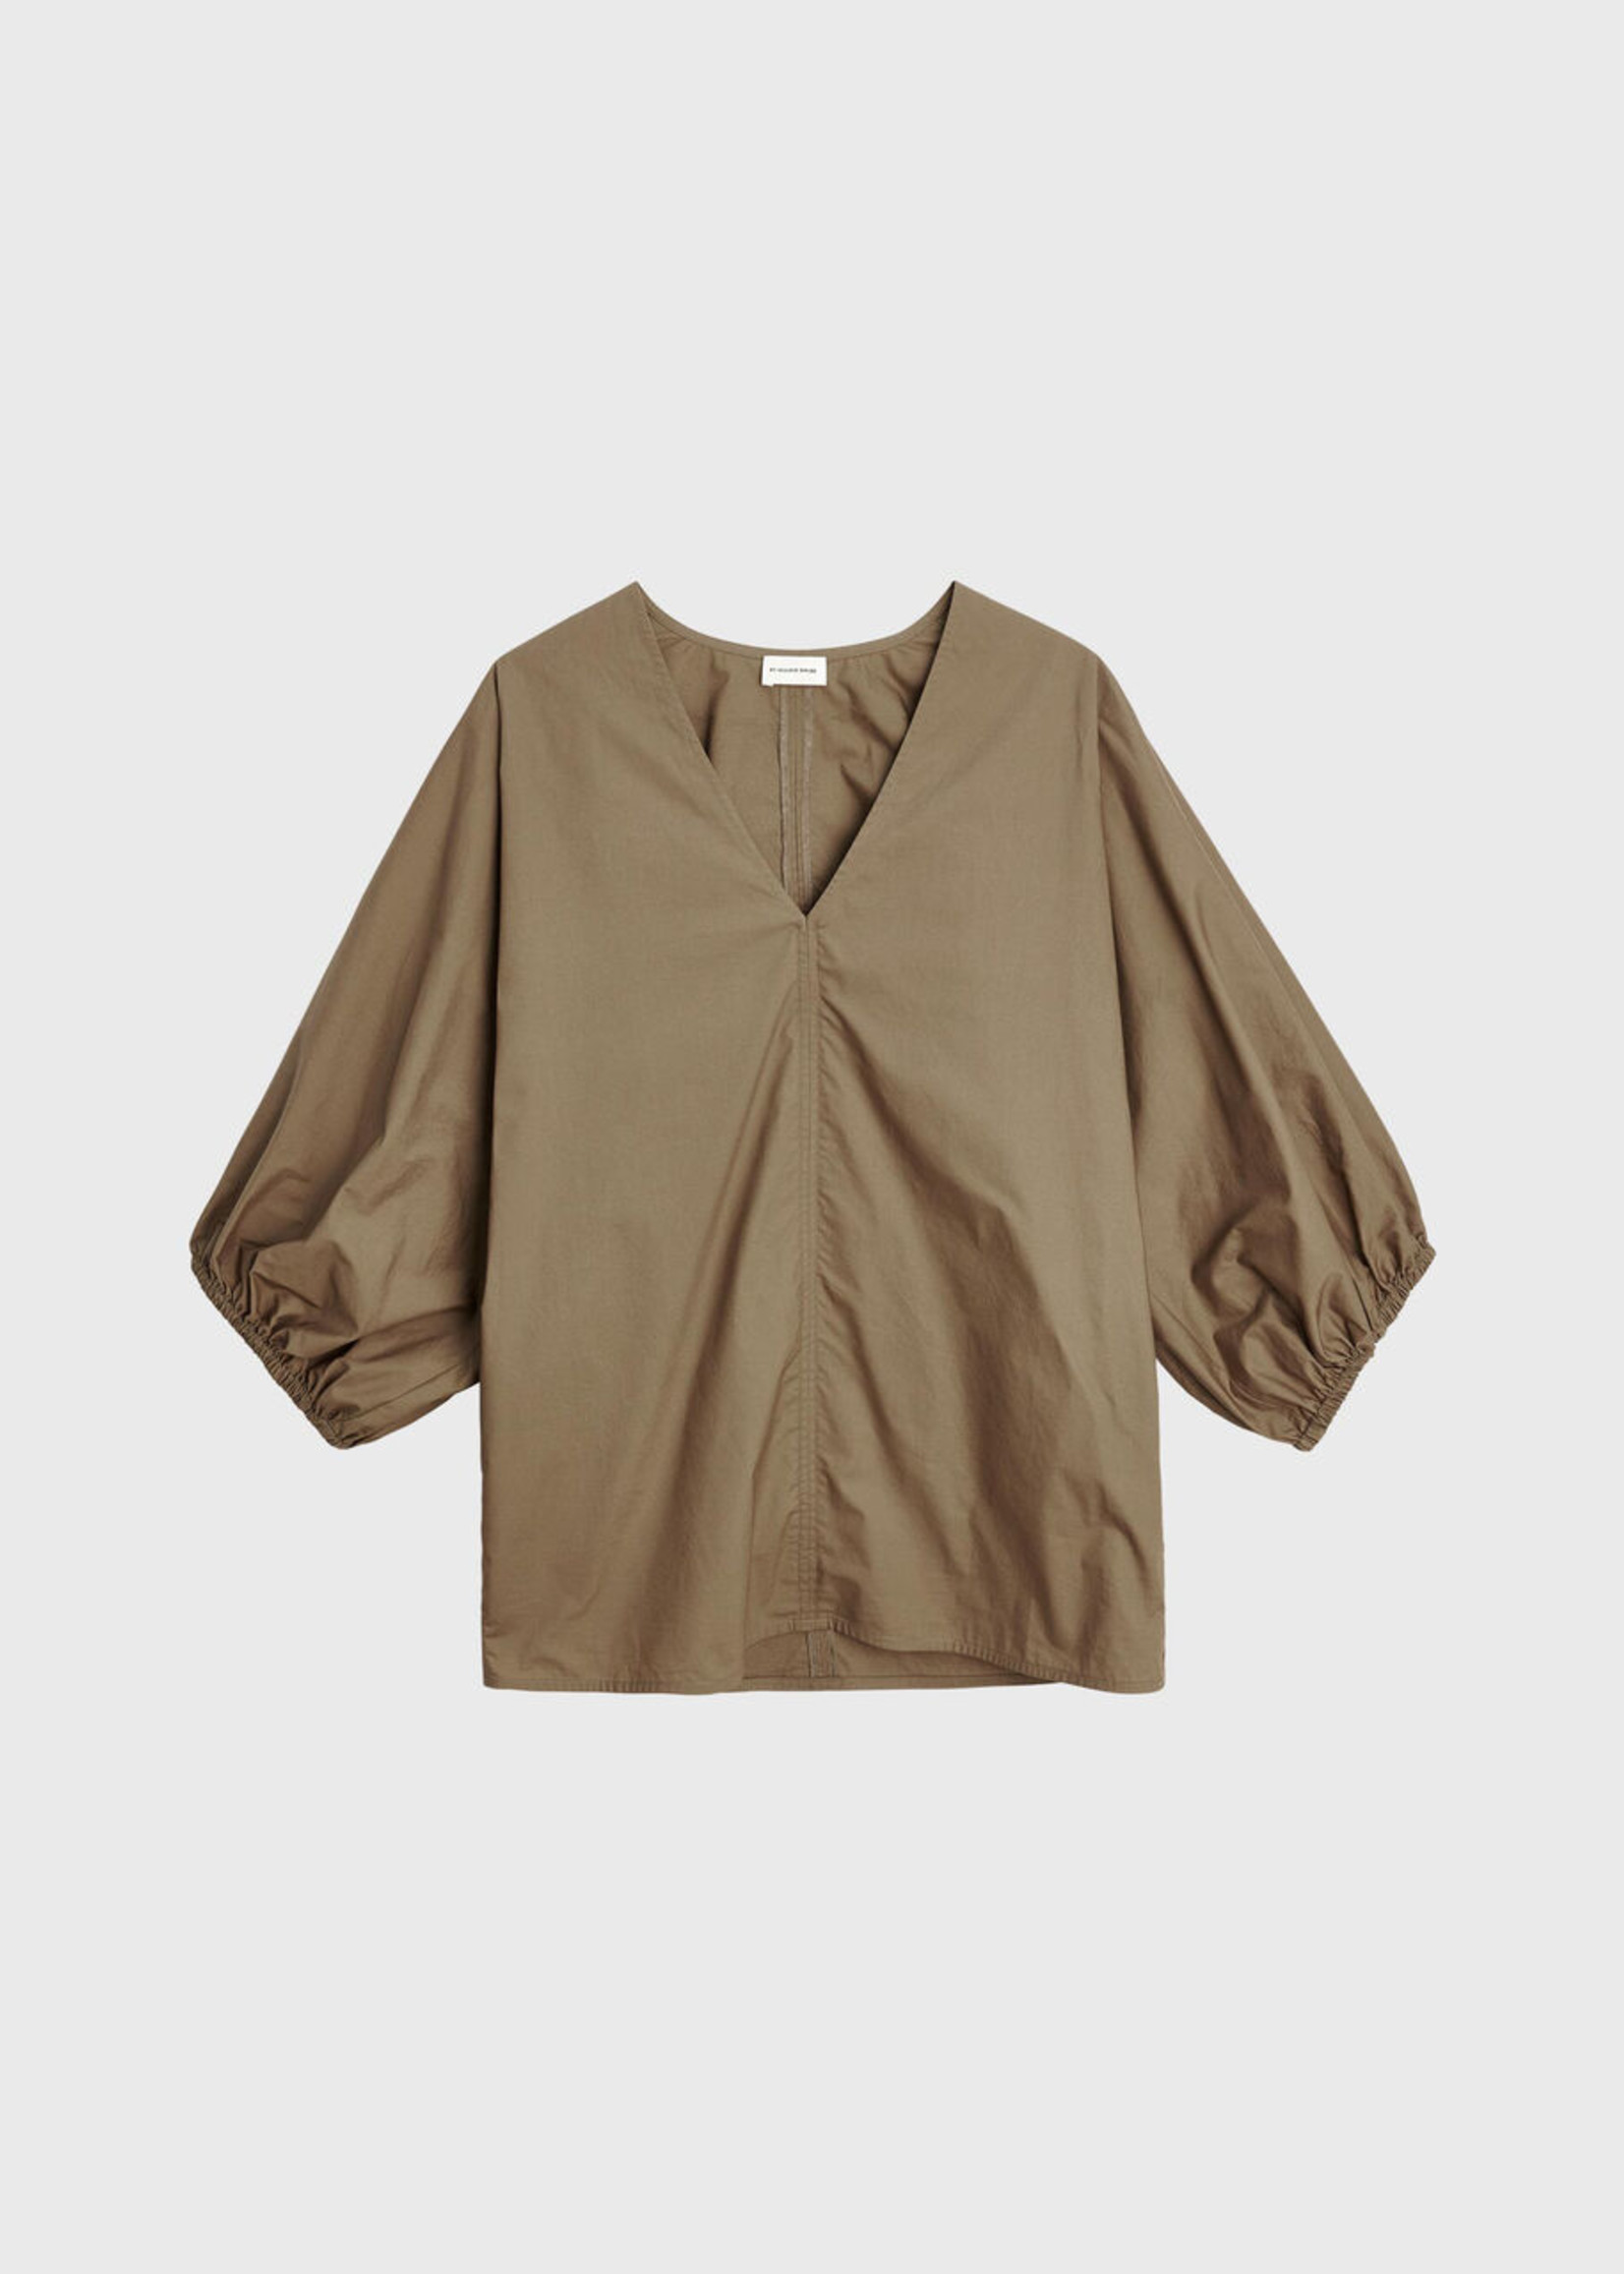 BY MALENE BIRGER PIAMONTES BLOUSE